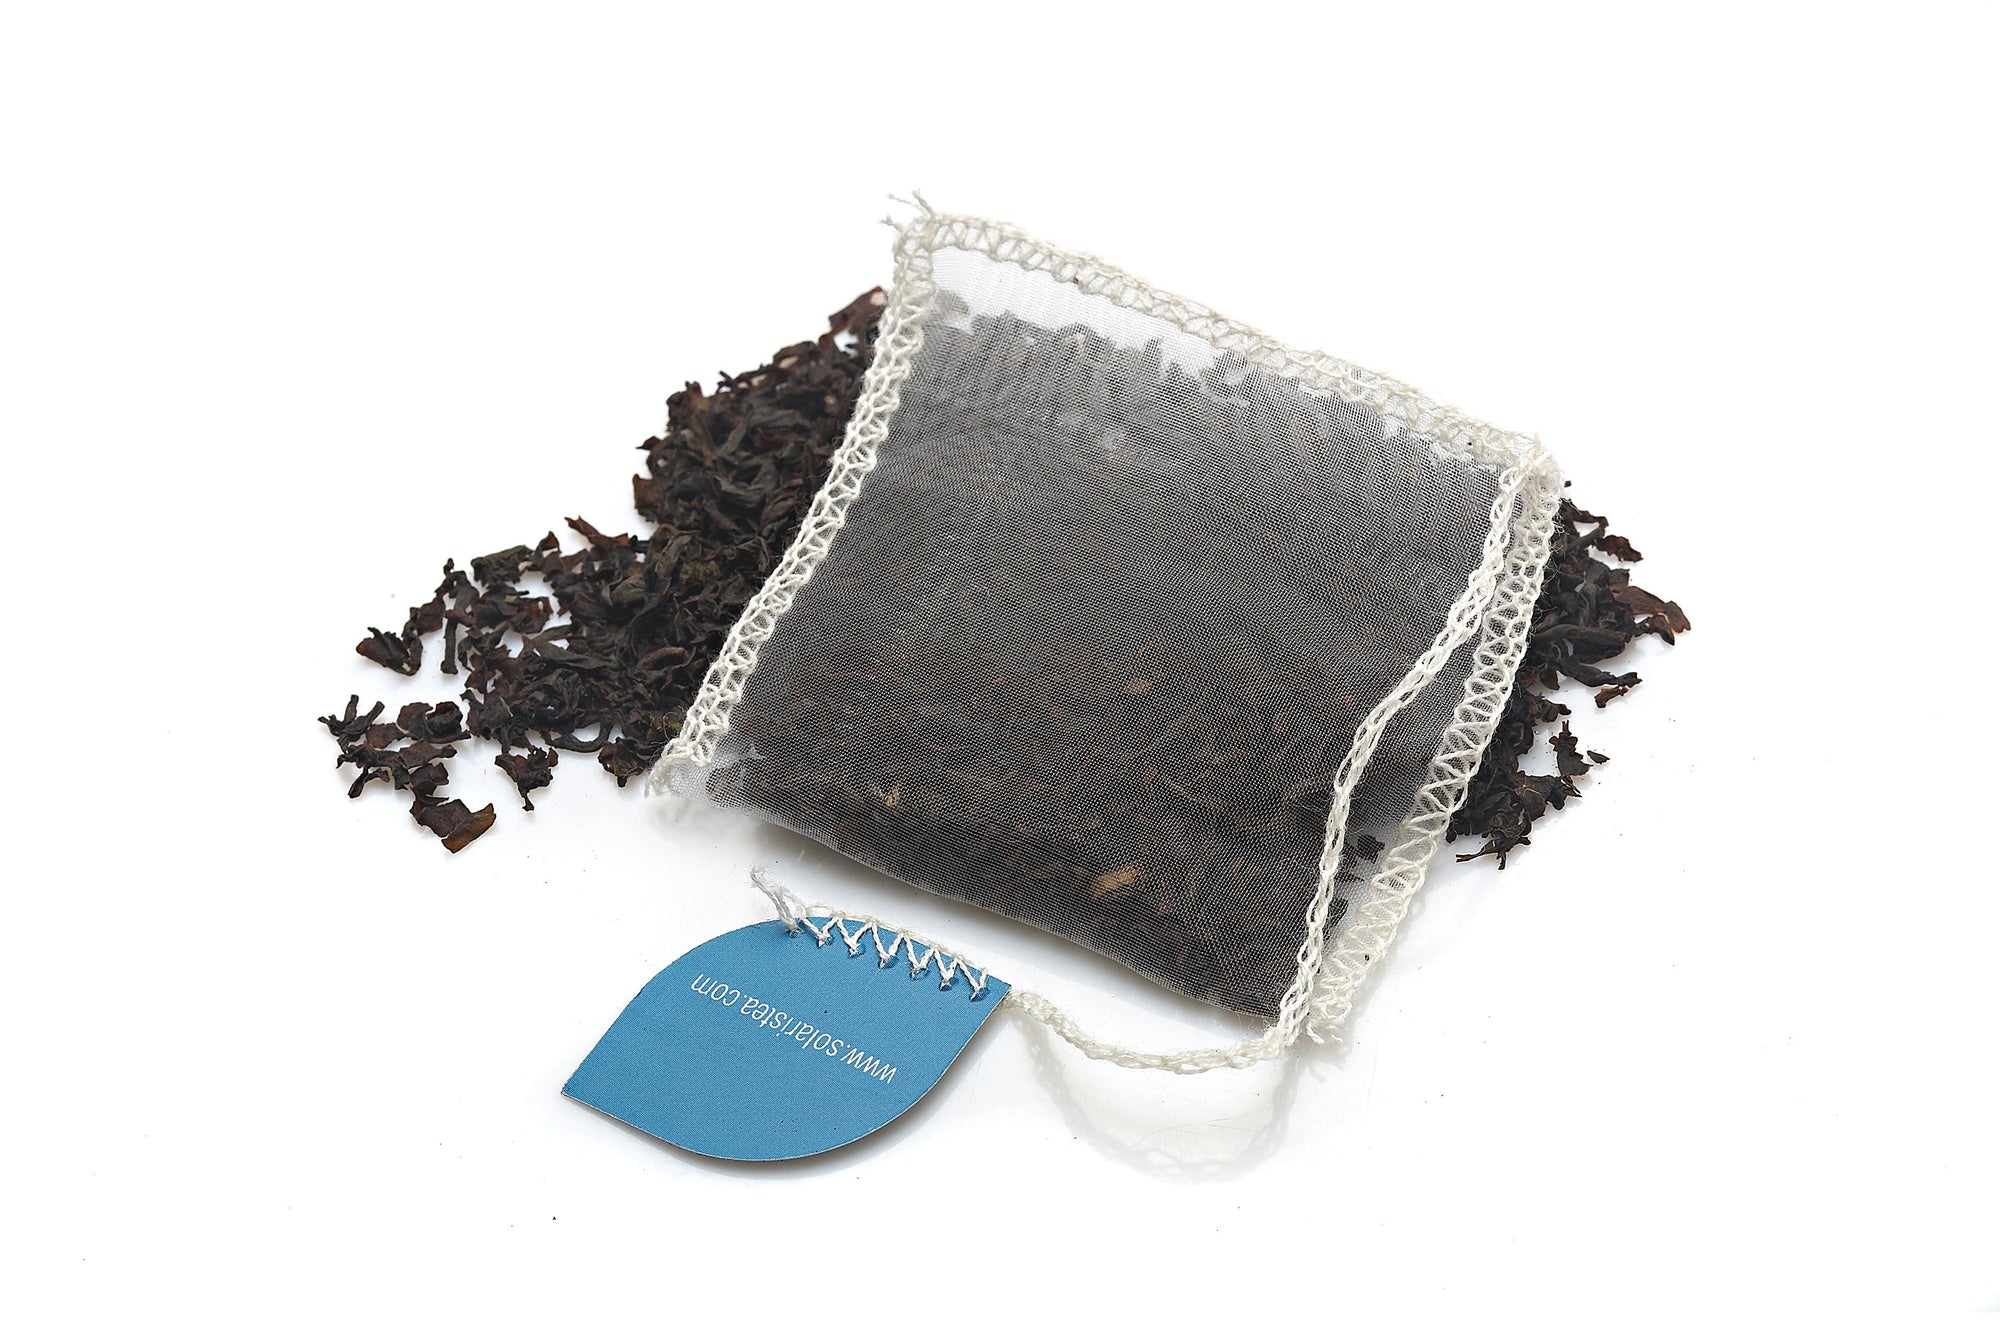 Is There Plastic In Your Tea? - Moral Fibres - UK Eco Blog